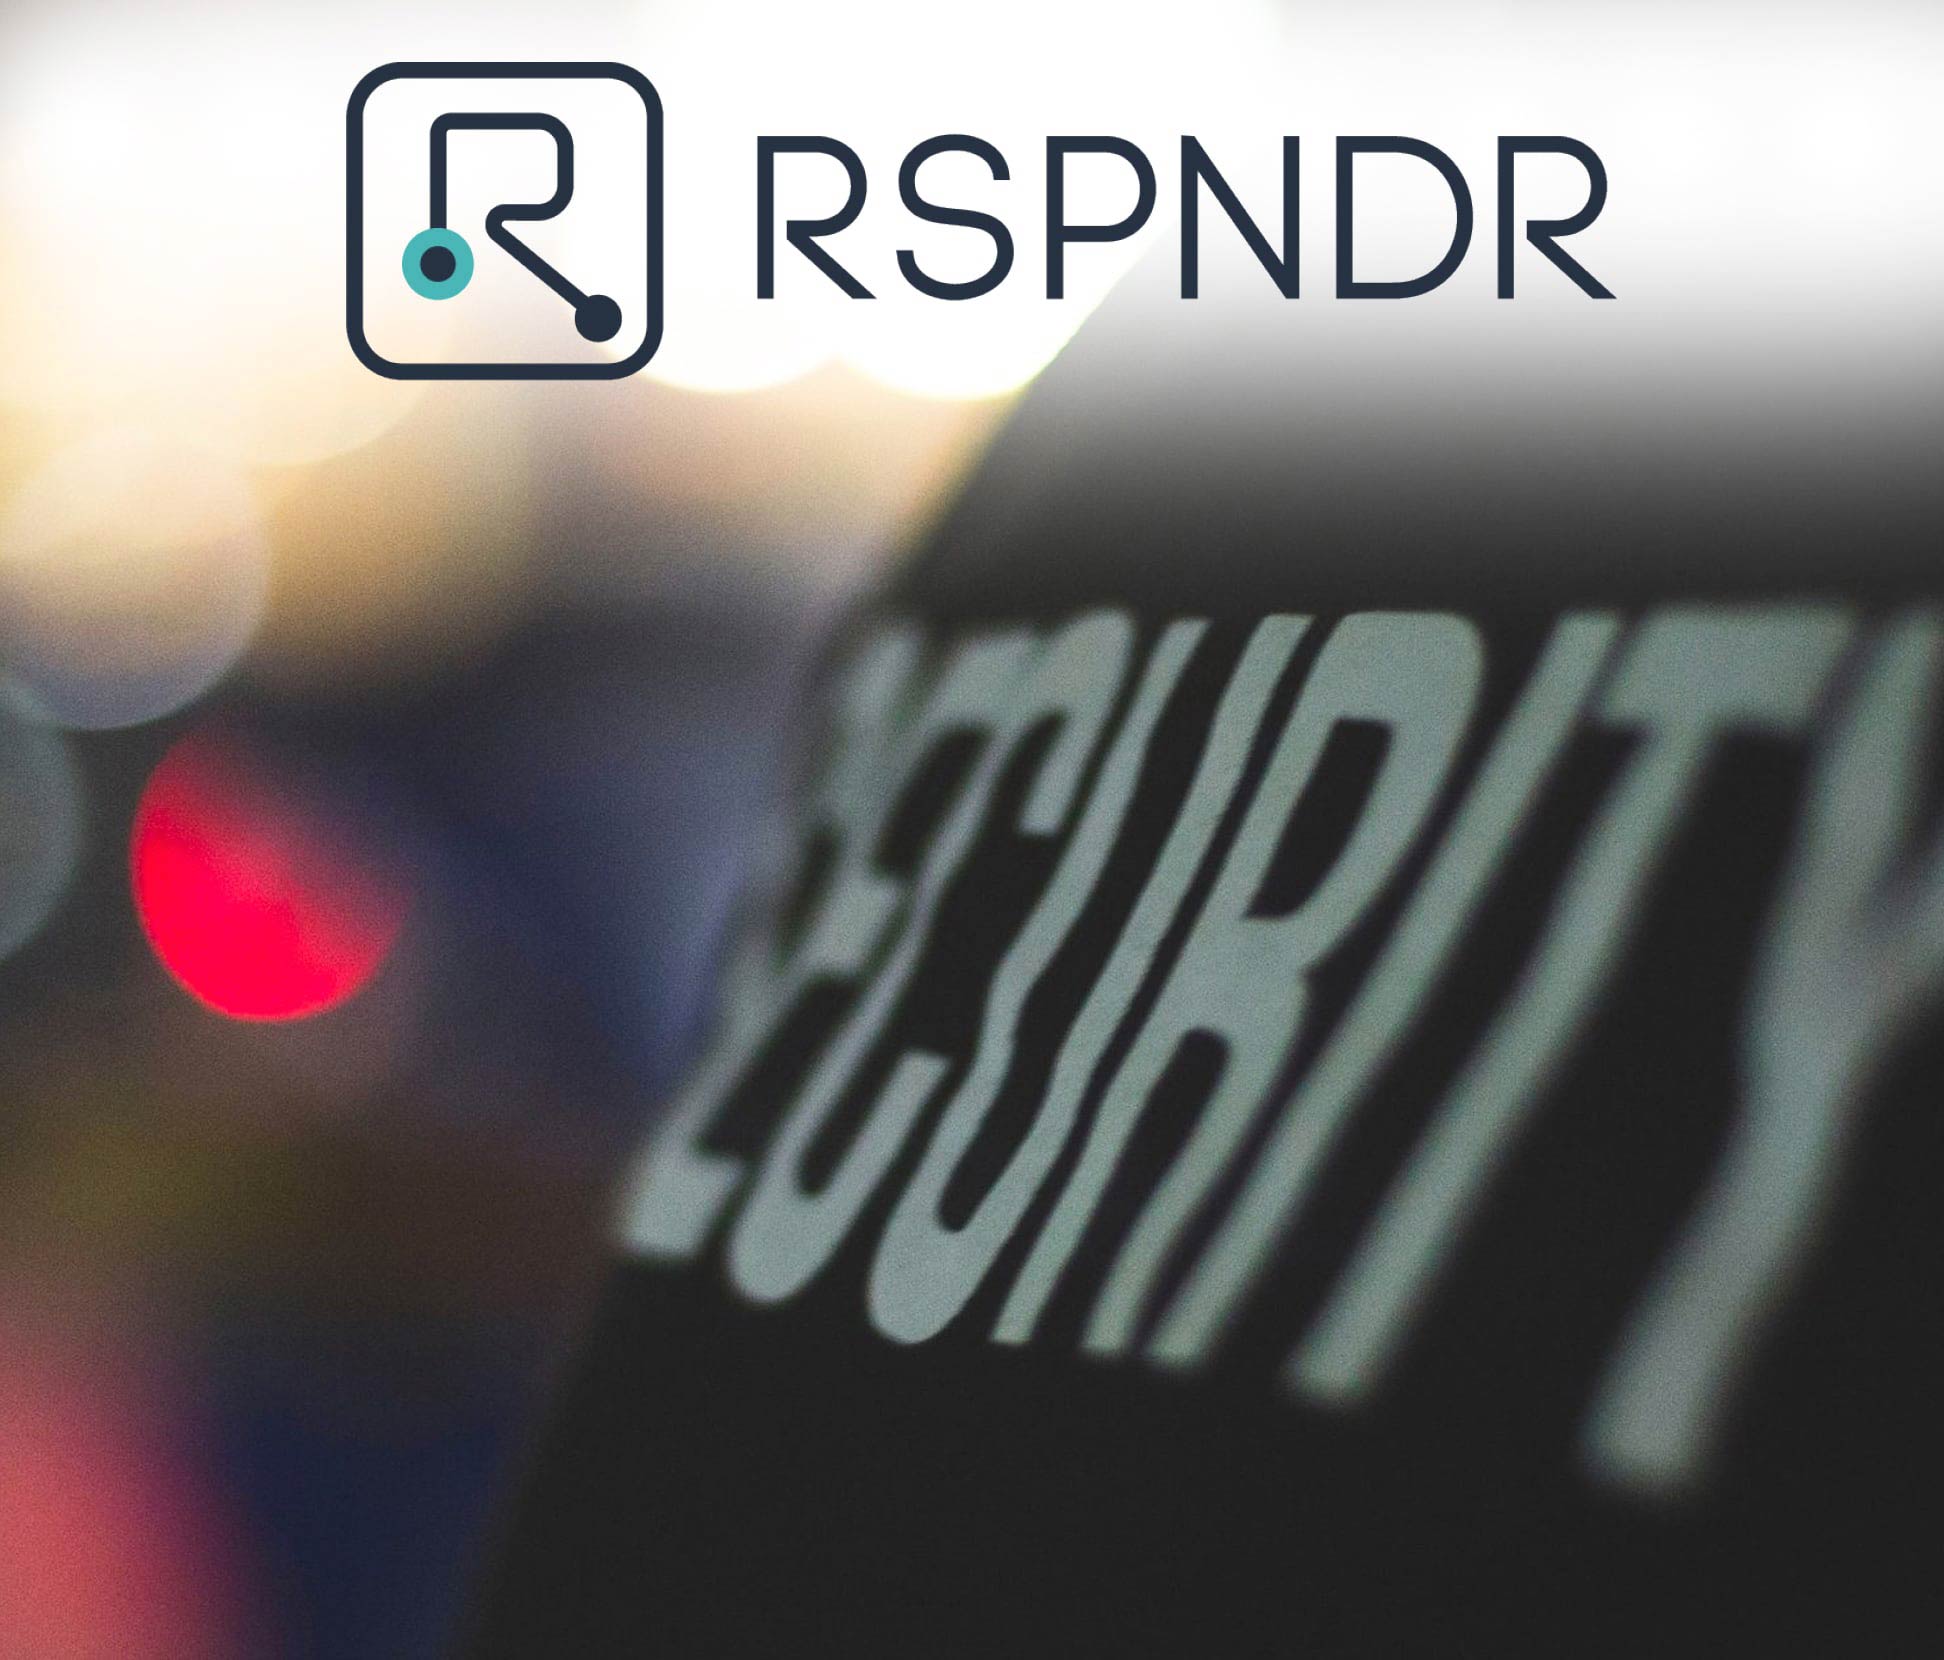 An image that says RSPNDR with security in the background.